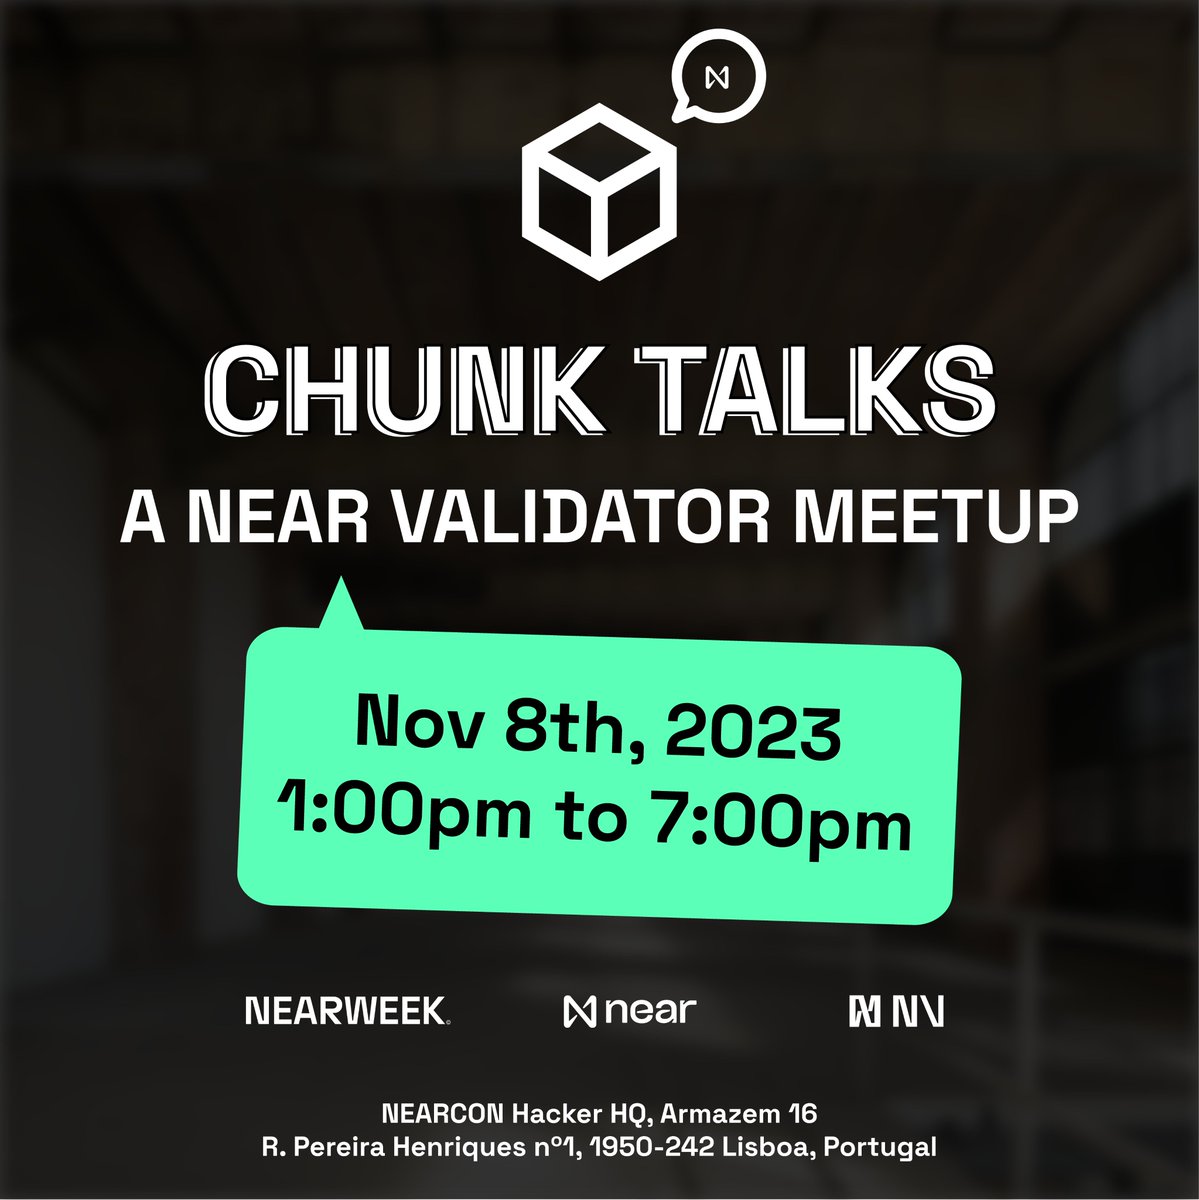 Get ready to join us at #NEARCON2023 in the vibrant city of Lisbon for an exciting gathering of NEAR Validators! 🏃

This is the first time we're taking our meetup offline and into the real world, and we couldn't be more thrilled! ⚡️

RSVP ▶️ lu.ma/Chunktalks2023